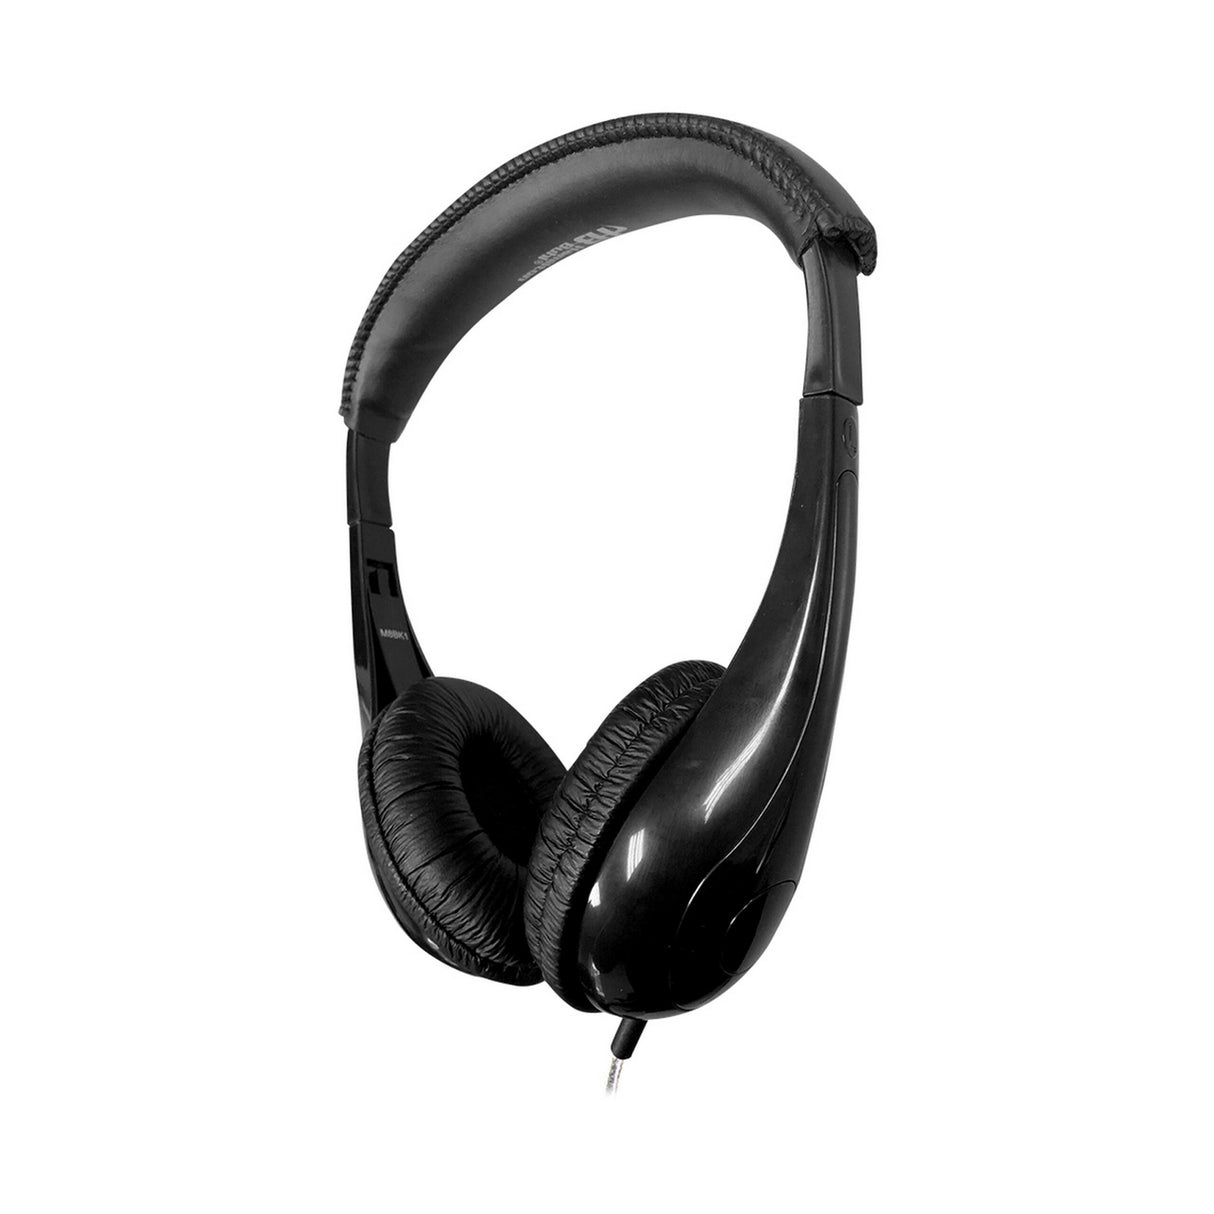 HamiltonBuhl Motiv8 Mid-Sized Headphone with In-line Volume Control